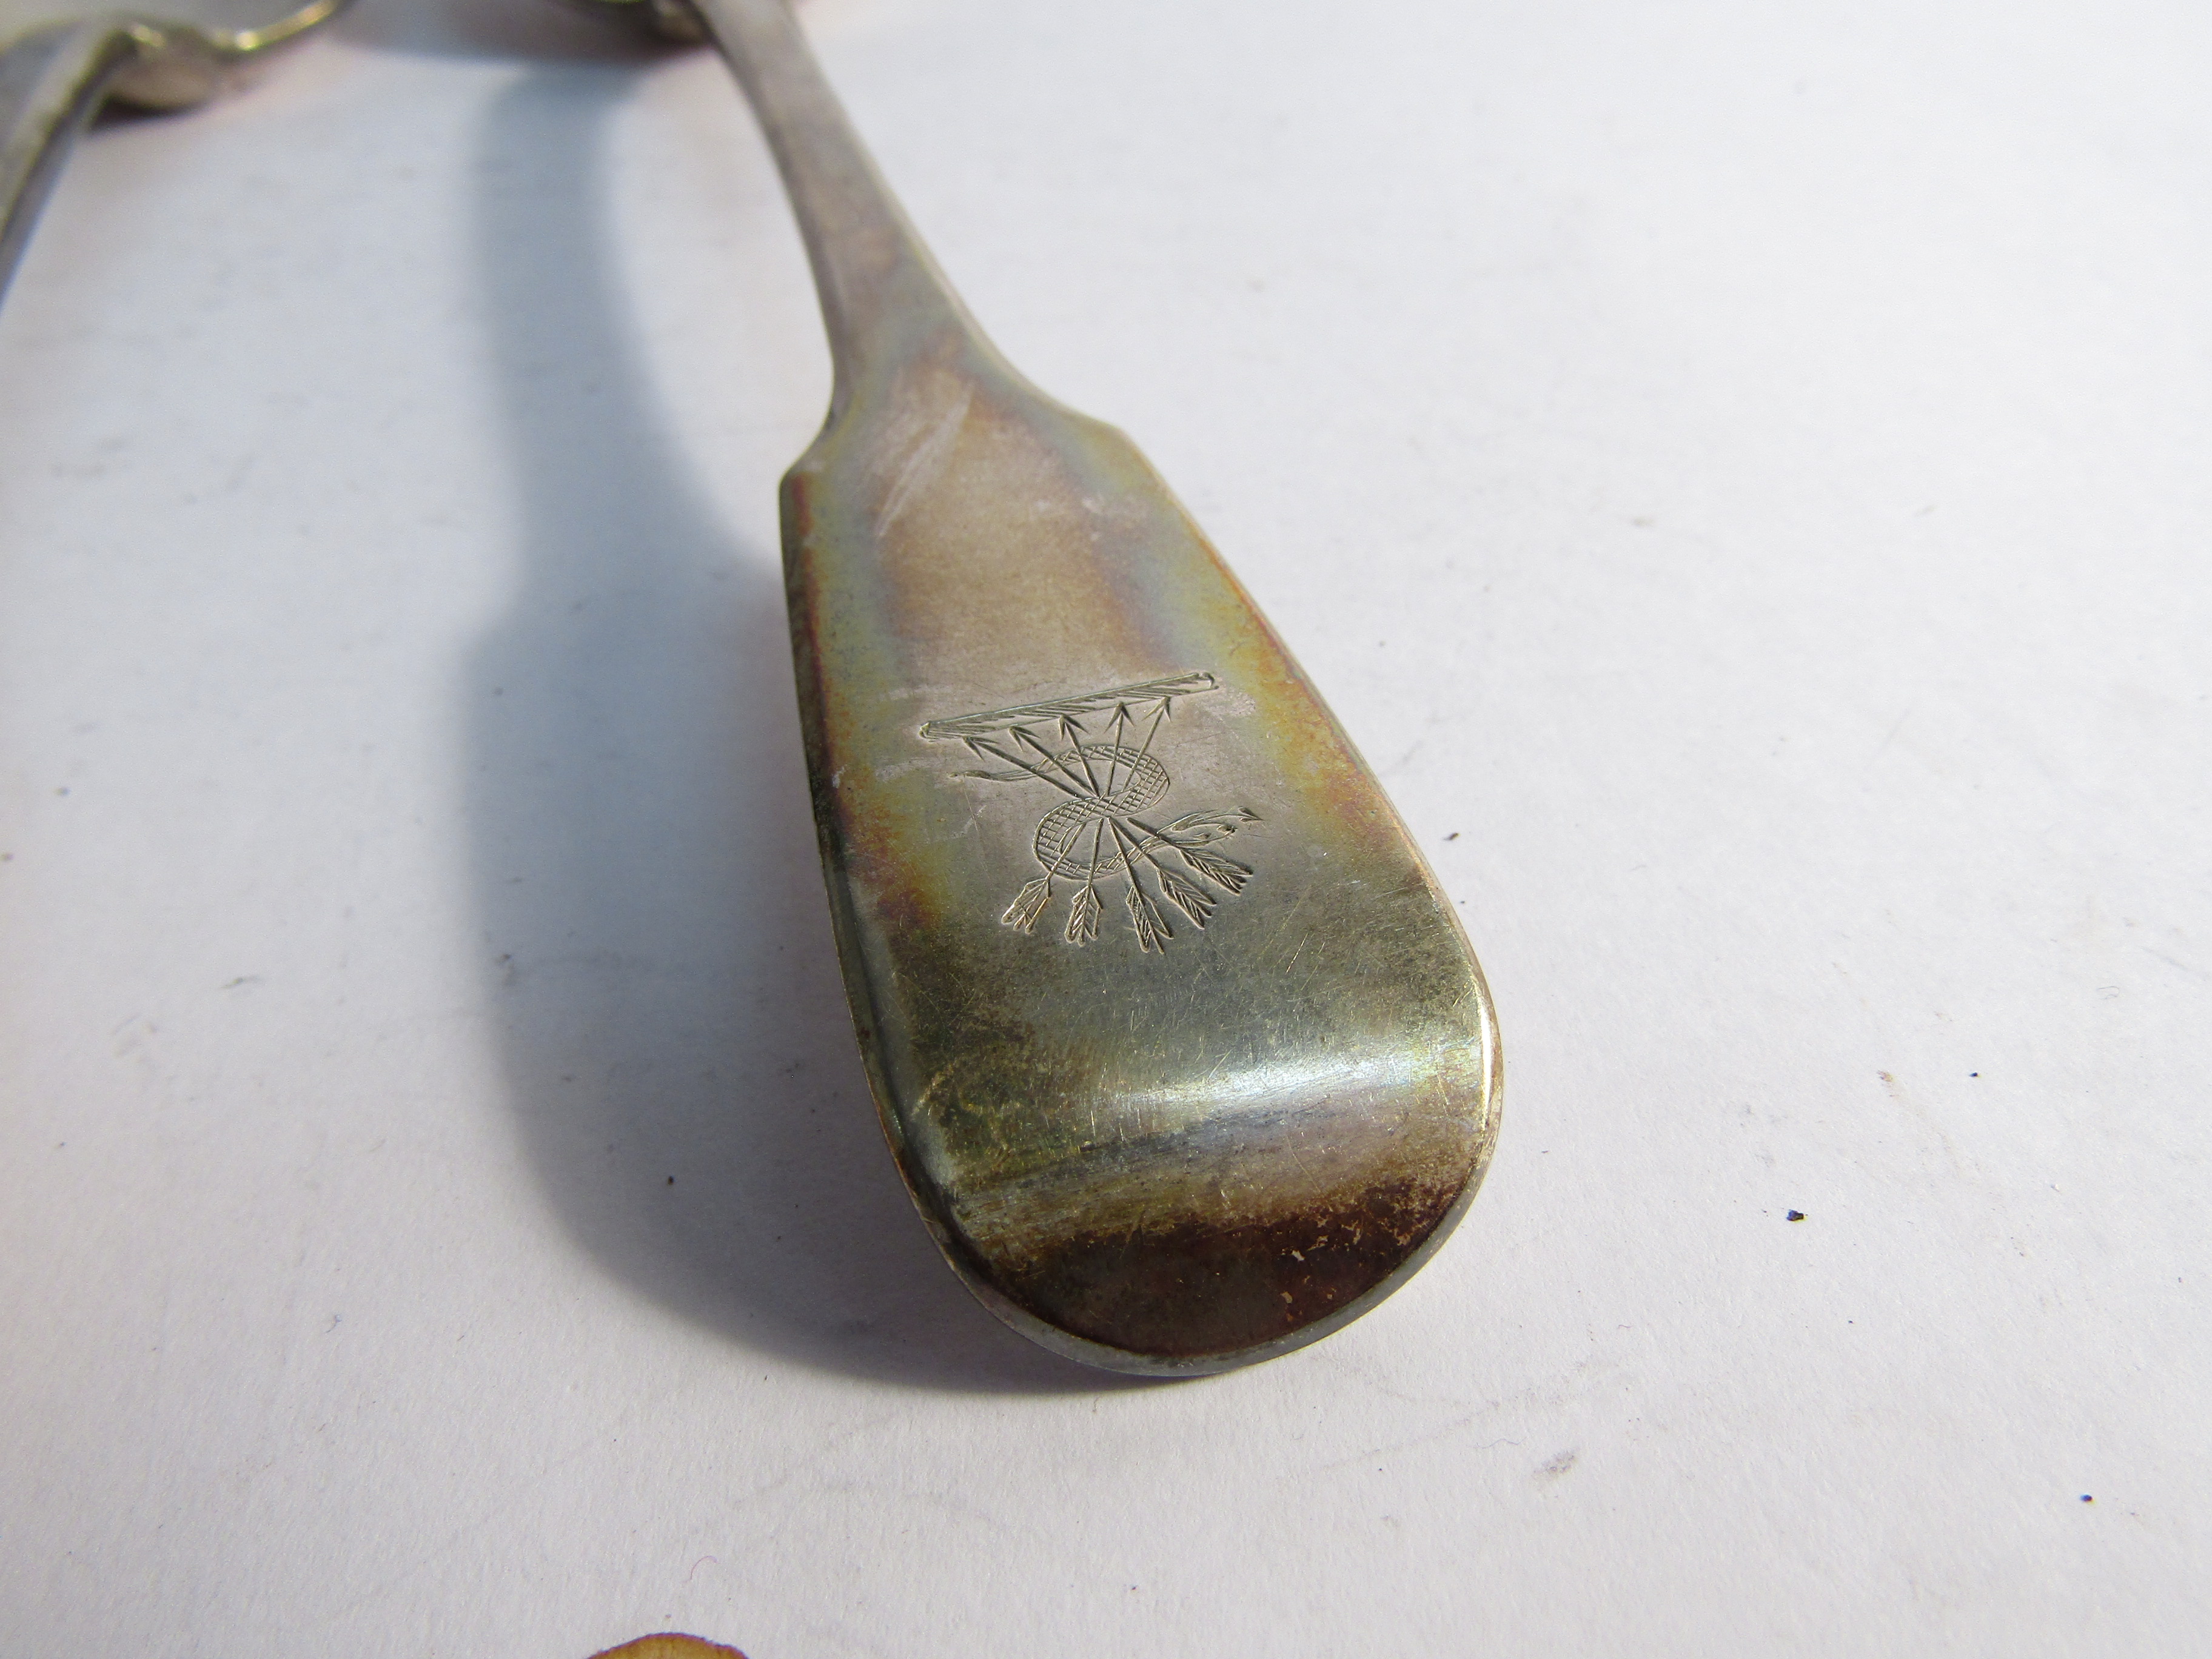 Victorian and Georgian silver flatware, three spoons and a fork all with matching crest, - Image 2 of 3